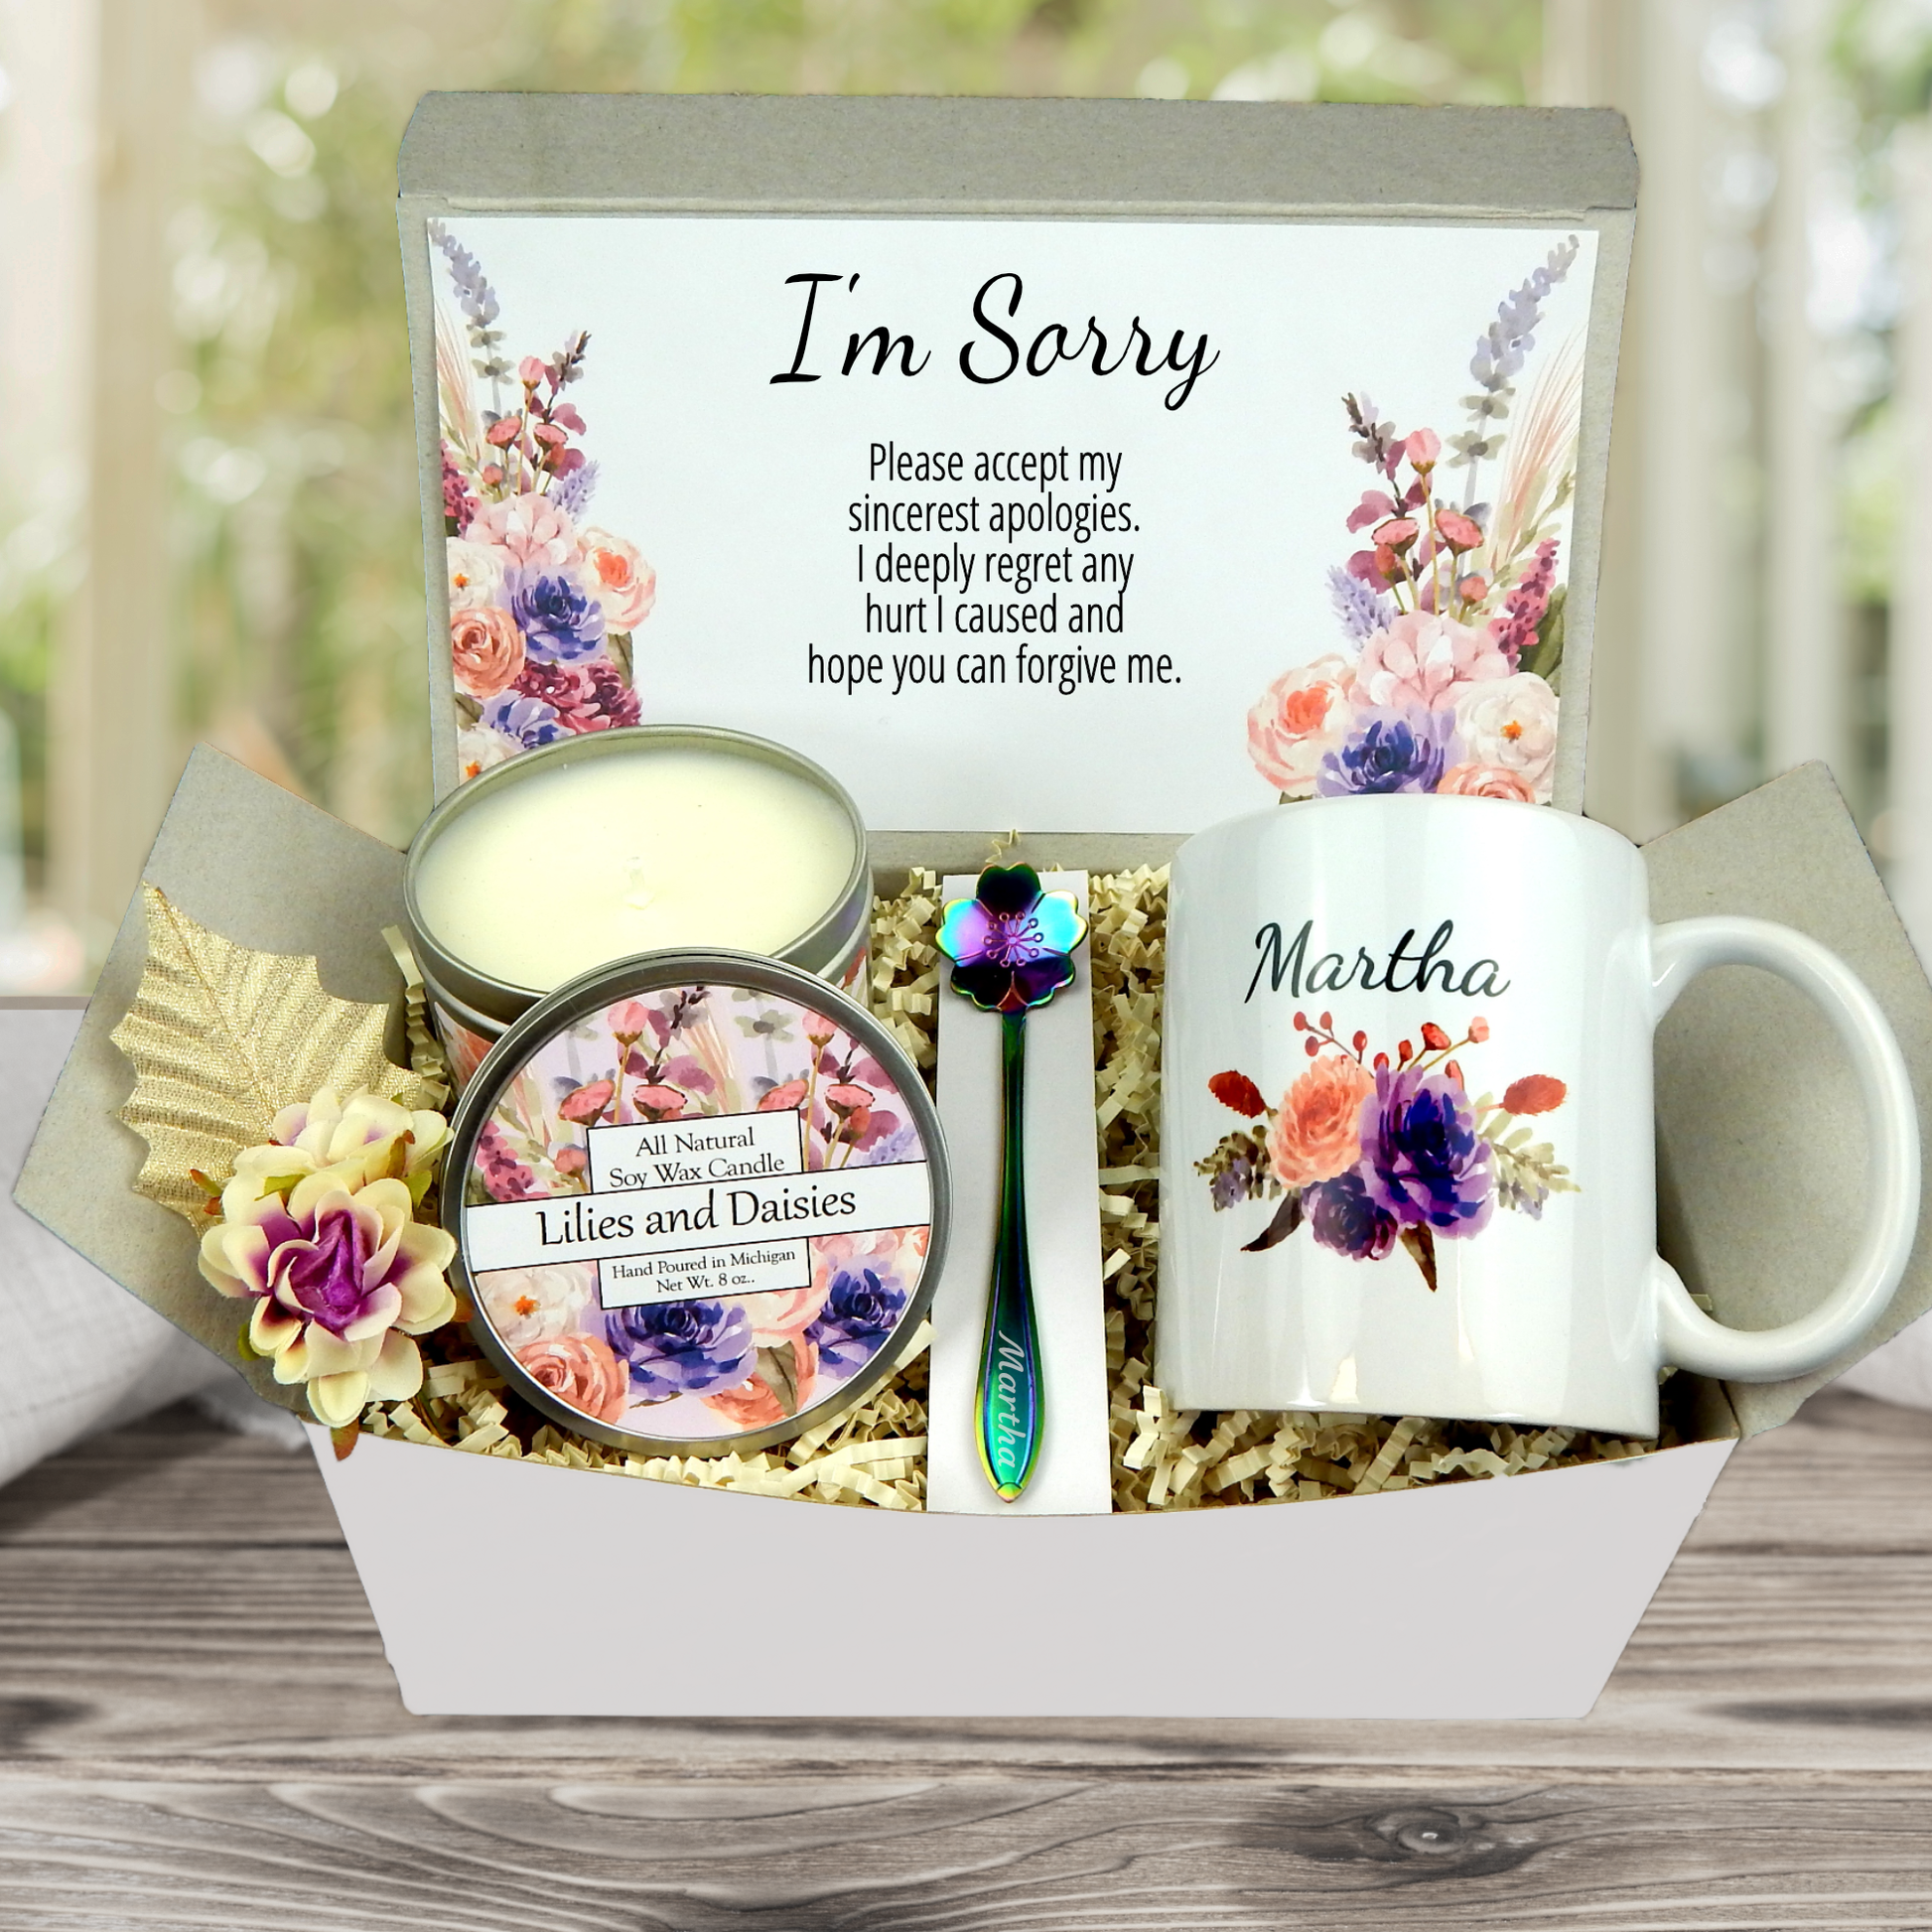 Apology-themed gift basket with keepsake coffee cup